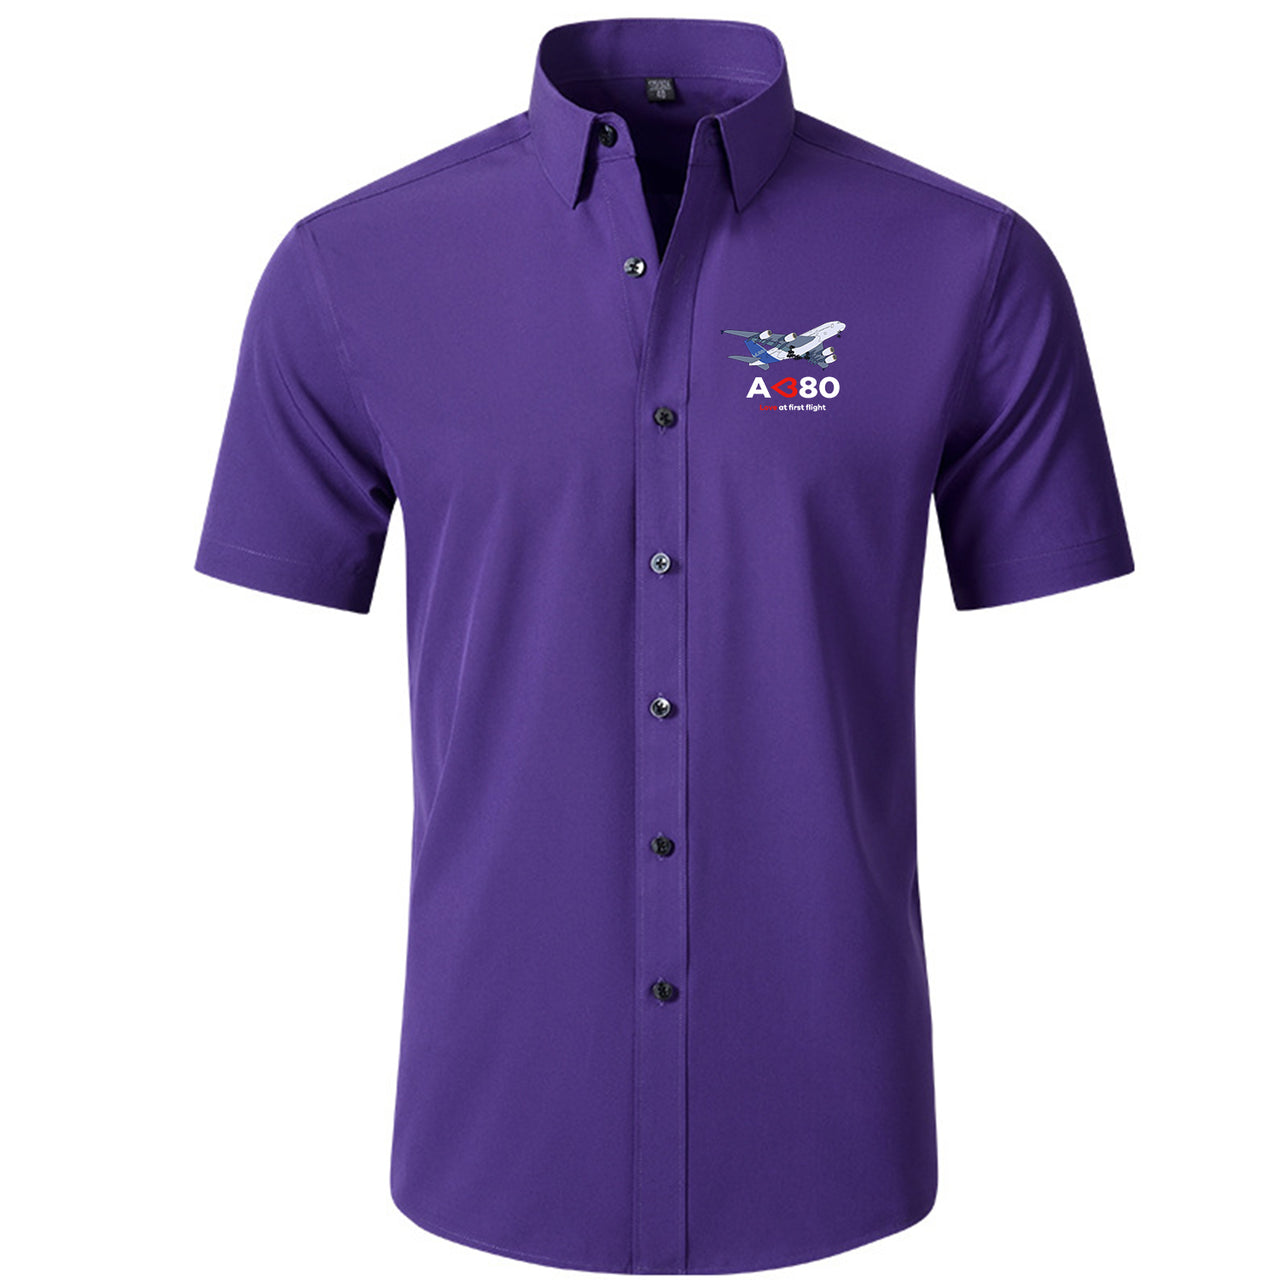 Airbus A380 Love at first flight Designed Short Sleeve Shirts